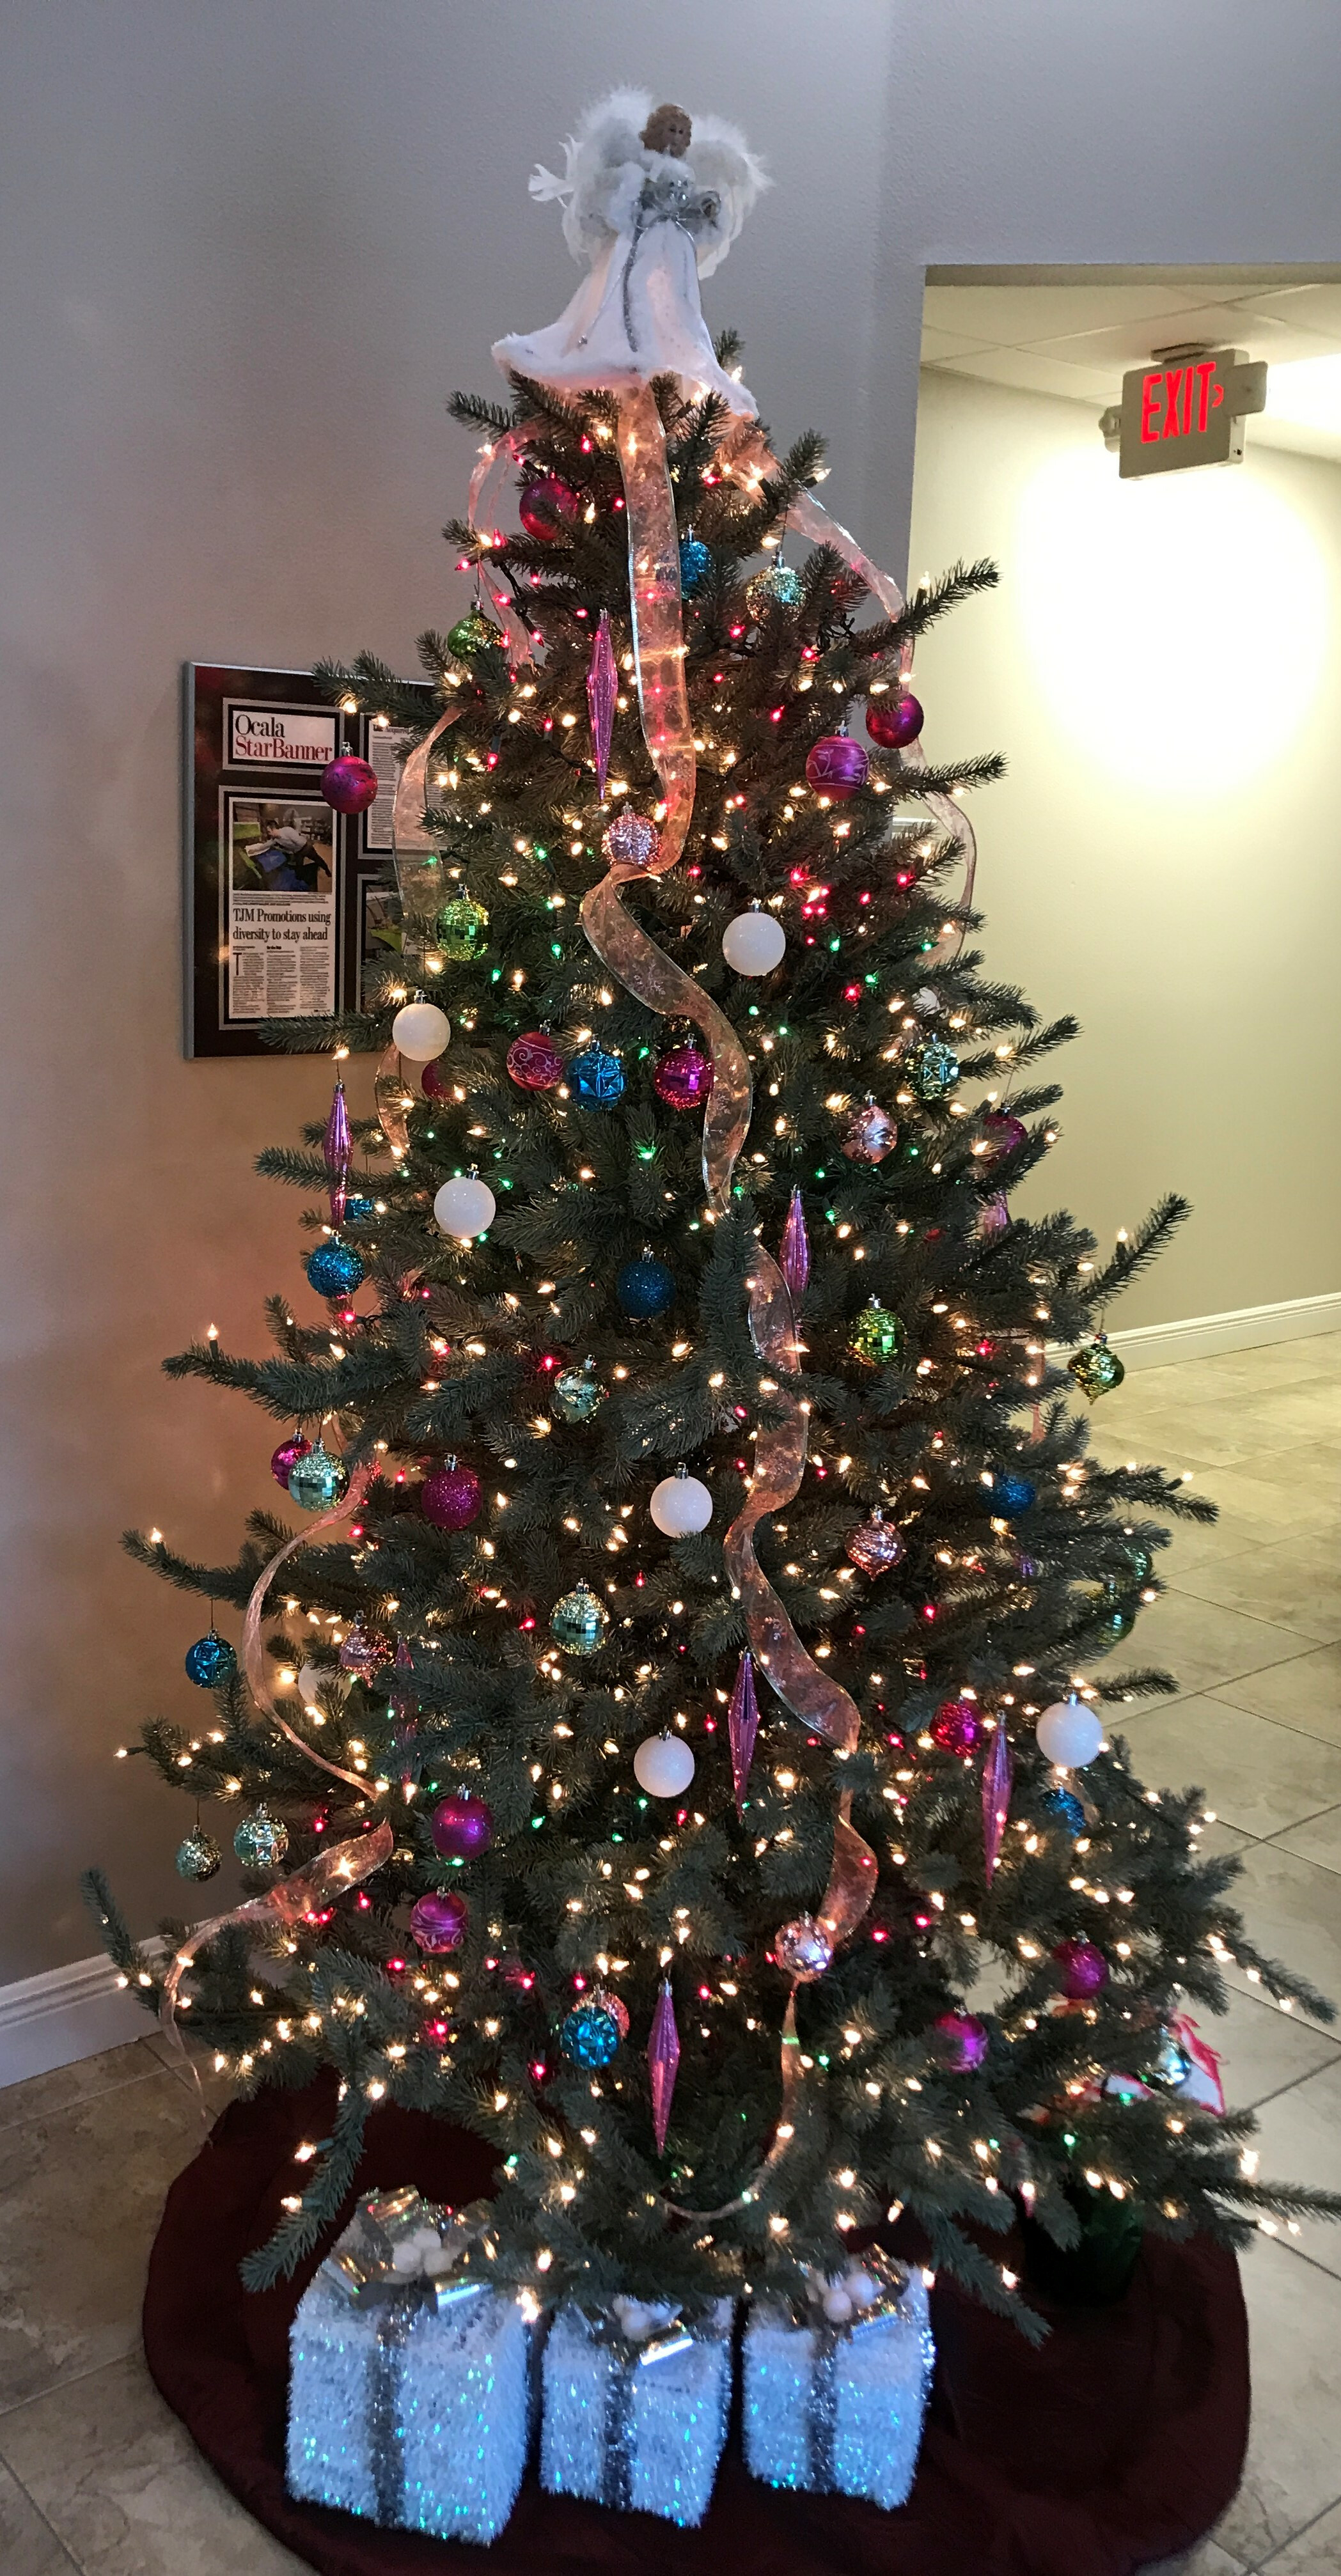 The Holidays at TJM: How We Celebrate